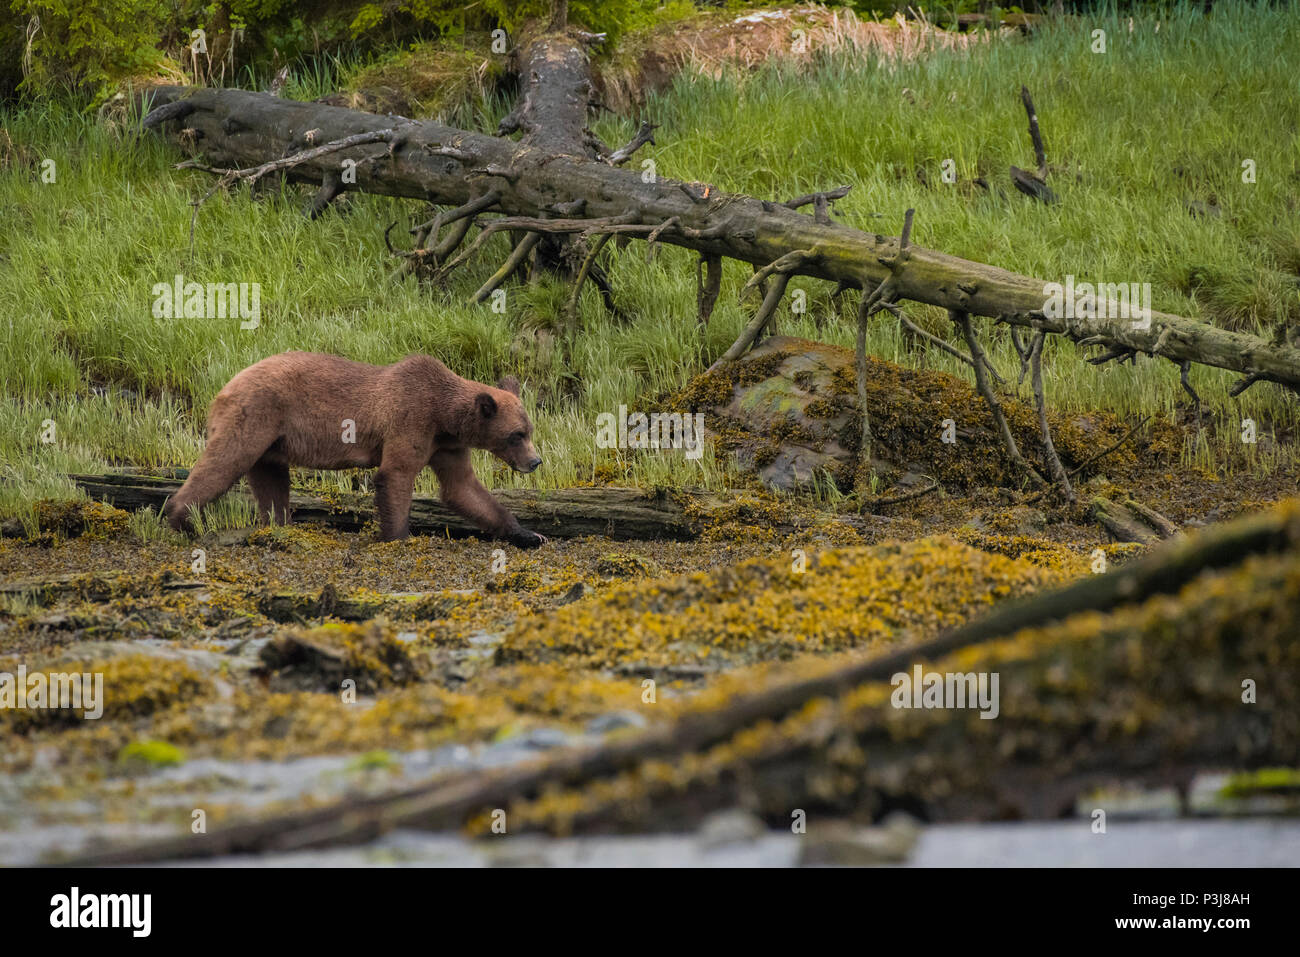 Brown bear, grizzly bear (Ursus arctos) in the Khutzeymateen Grizzly Sanctuary, British Columbia, Canada Stock Photo